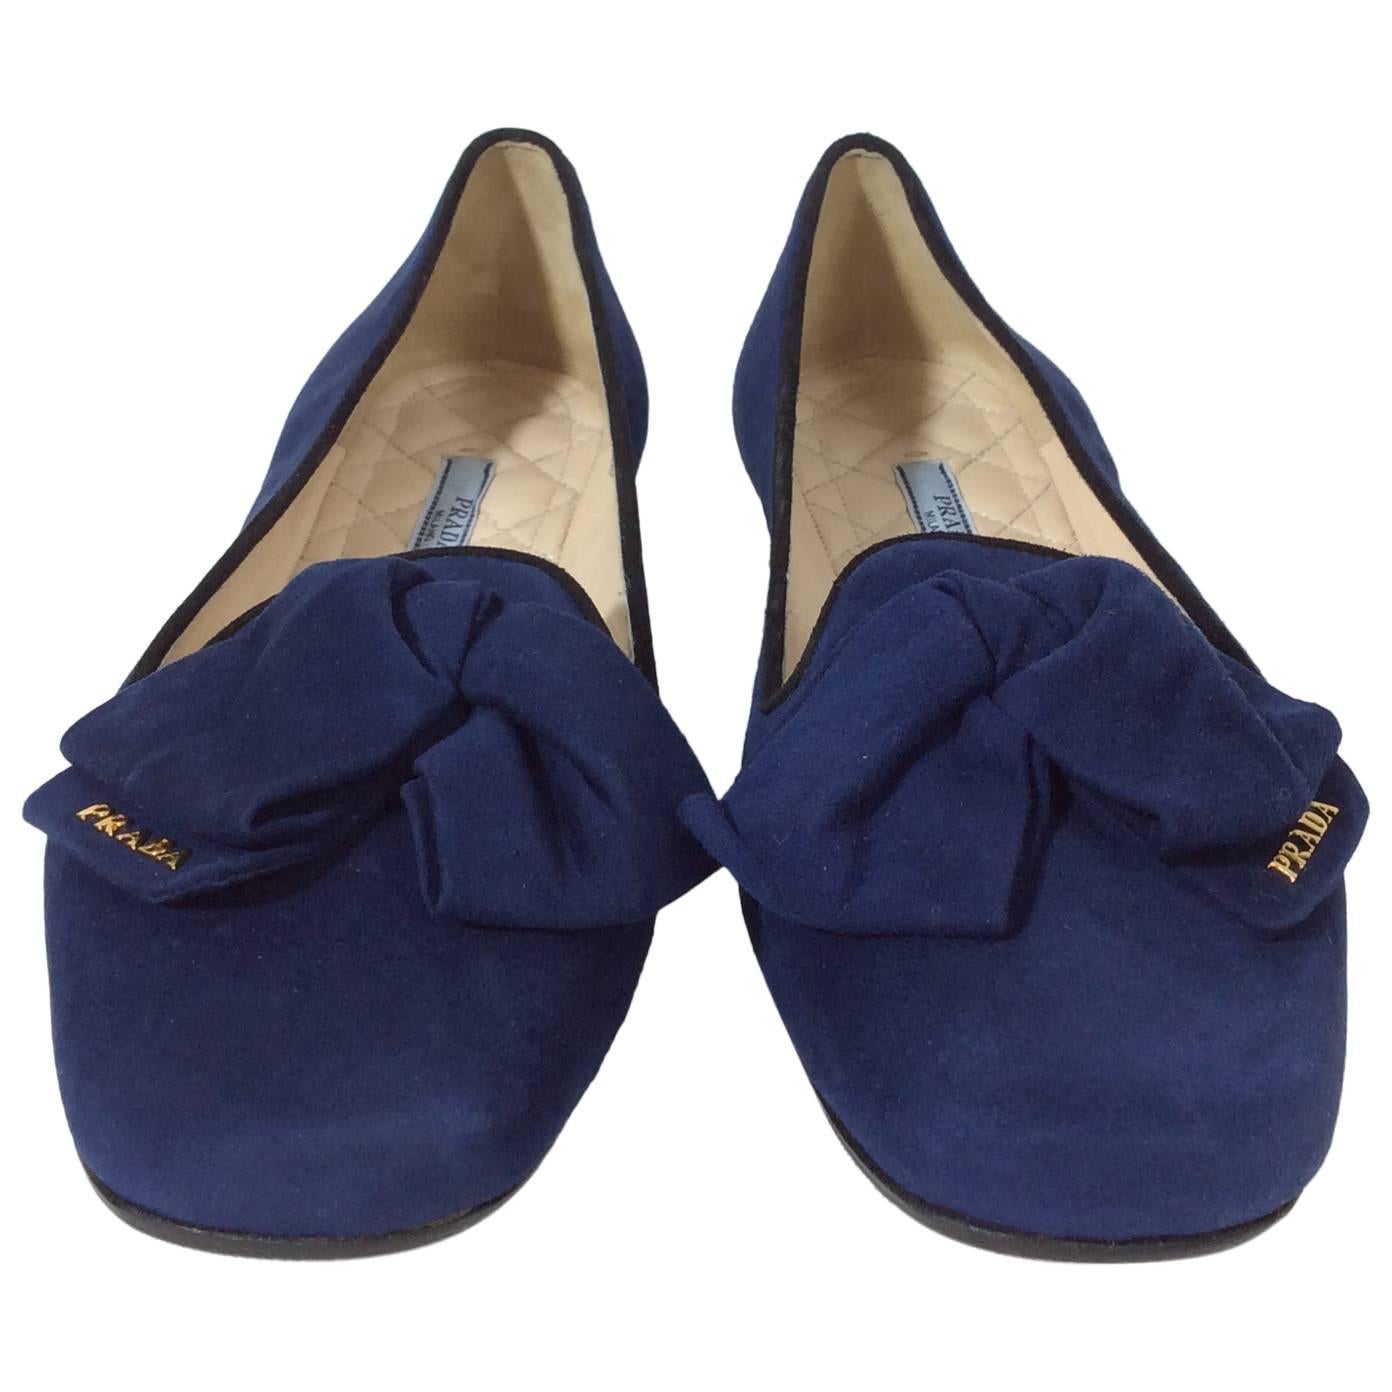 Prada Navy Suede Loafers with Bow Detail